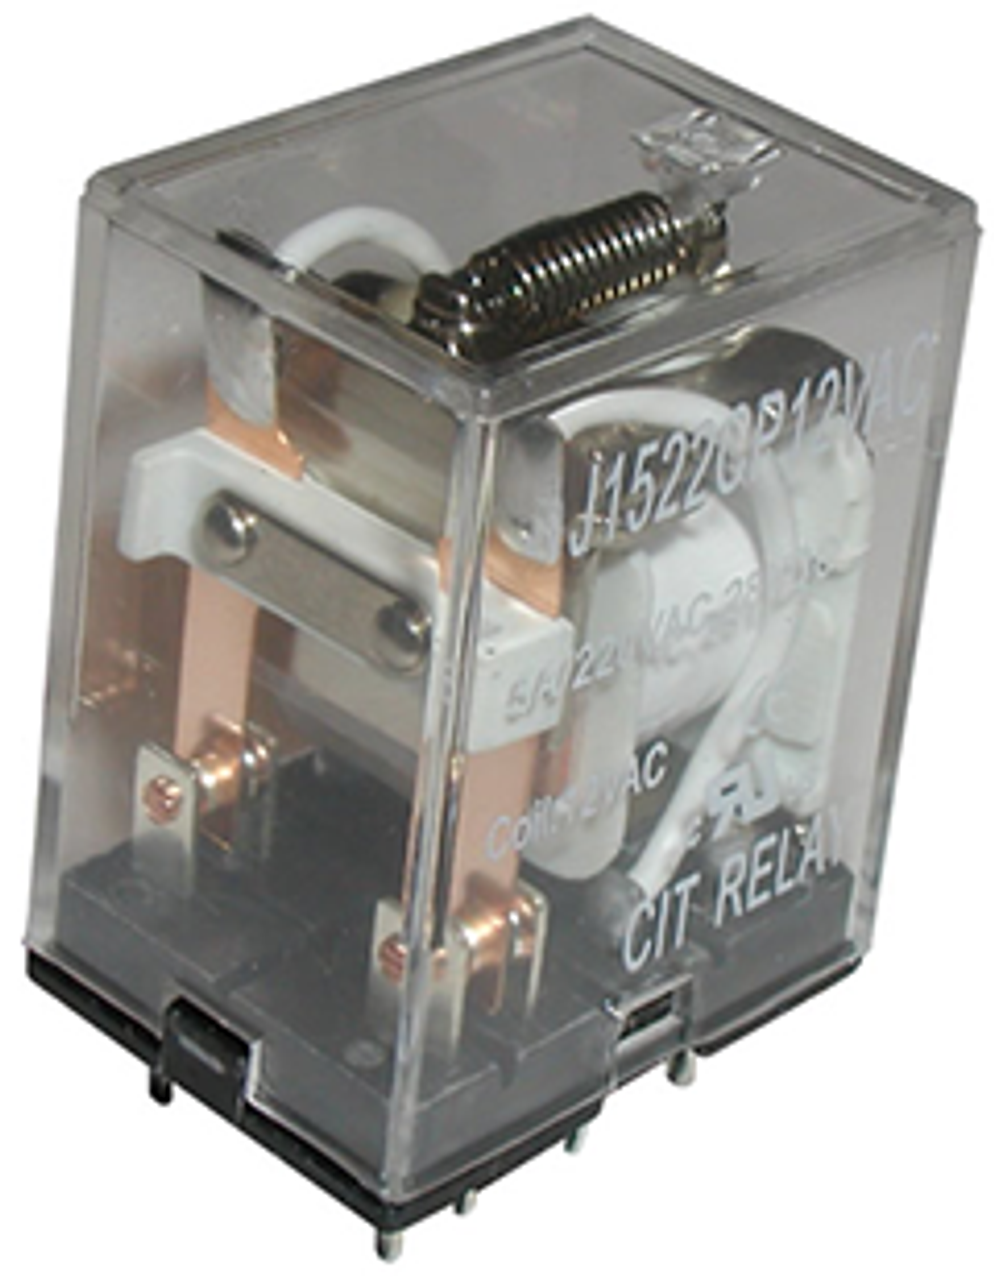 CIT Relay and Switch J1522CP110VACDT Industrial Relays